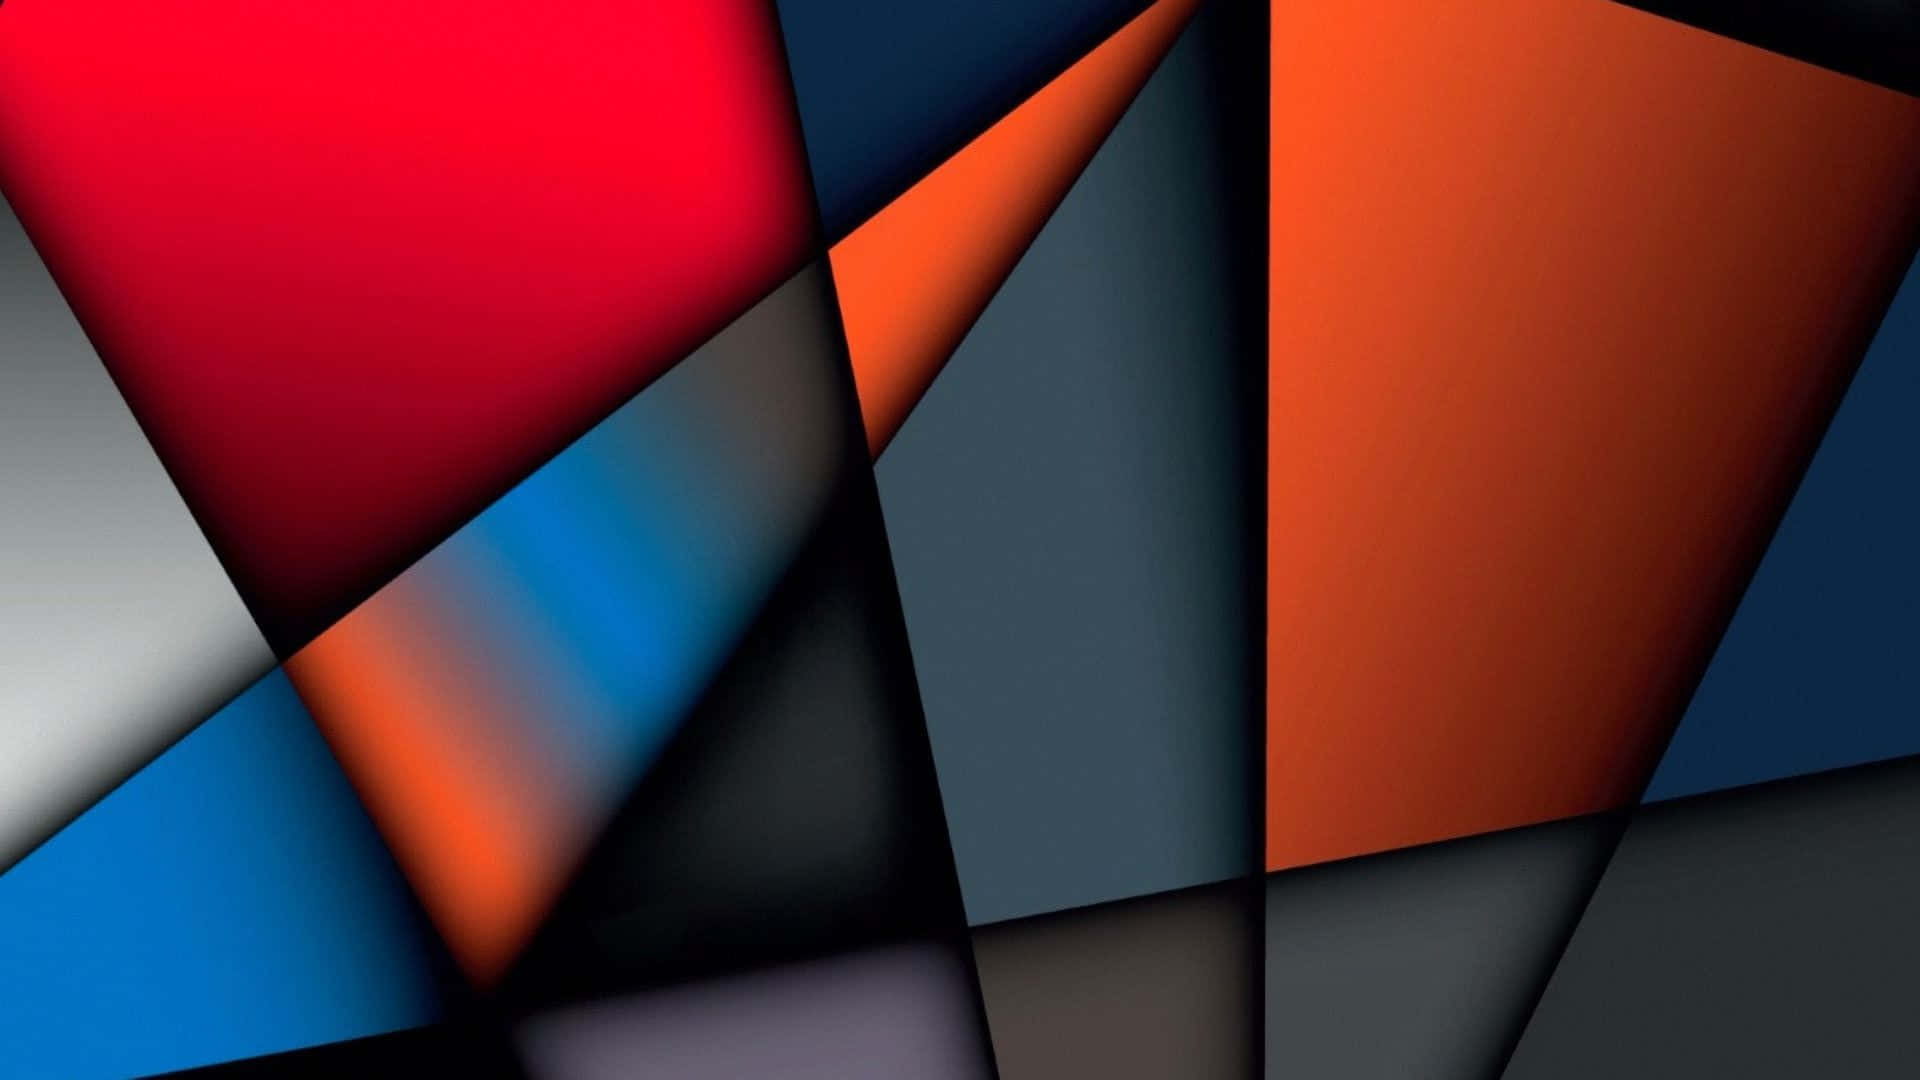 A vibrant dance of colors and shapes Wallpaper